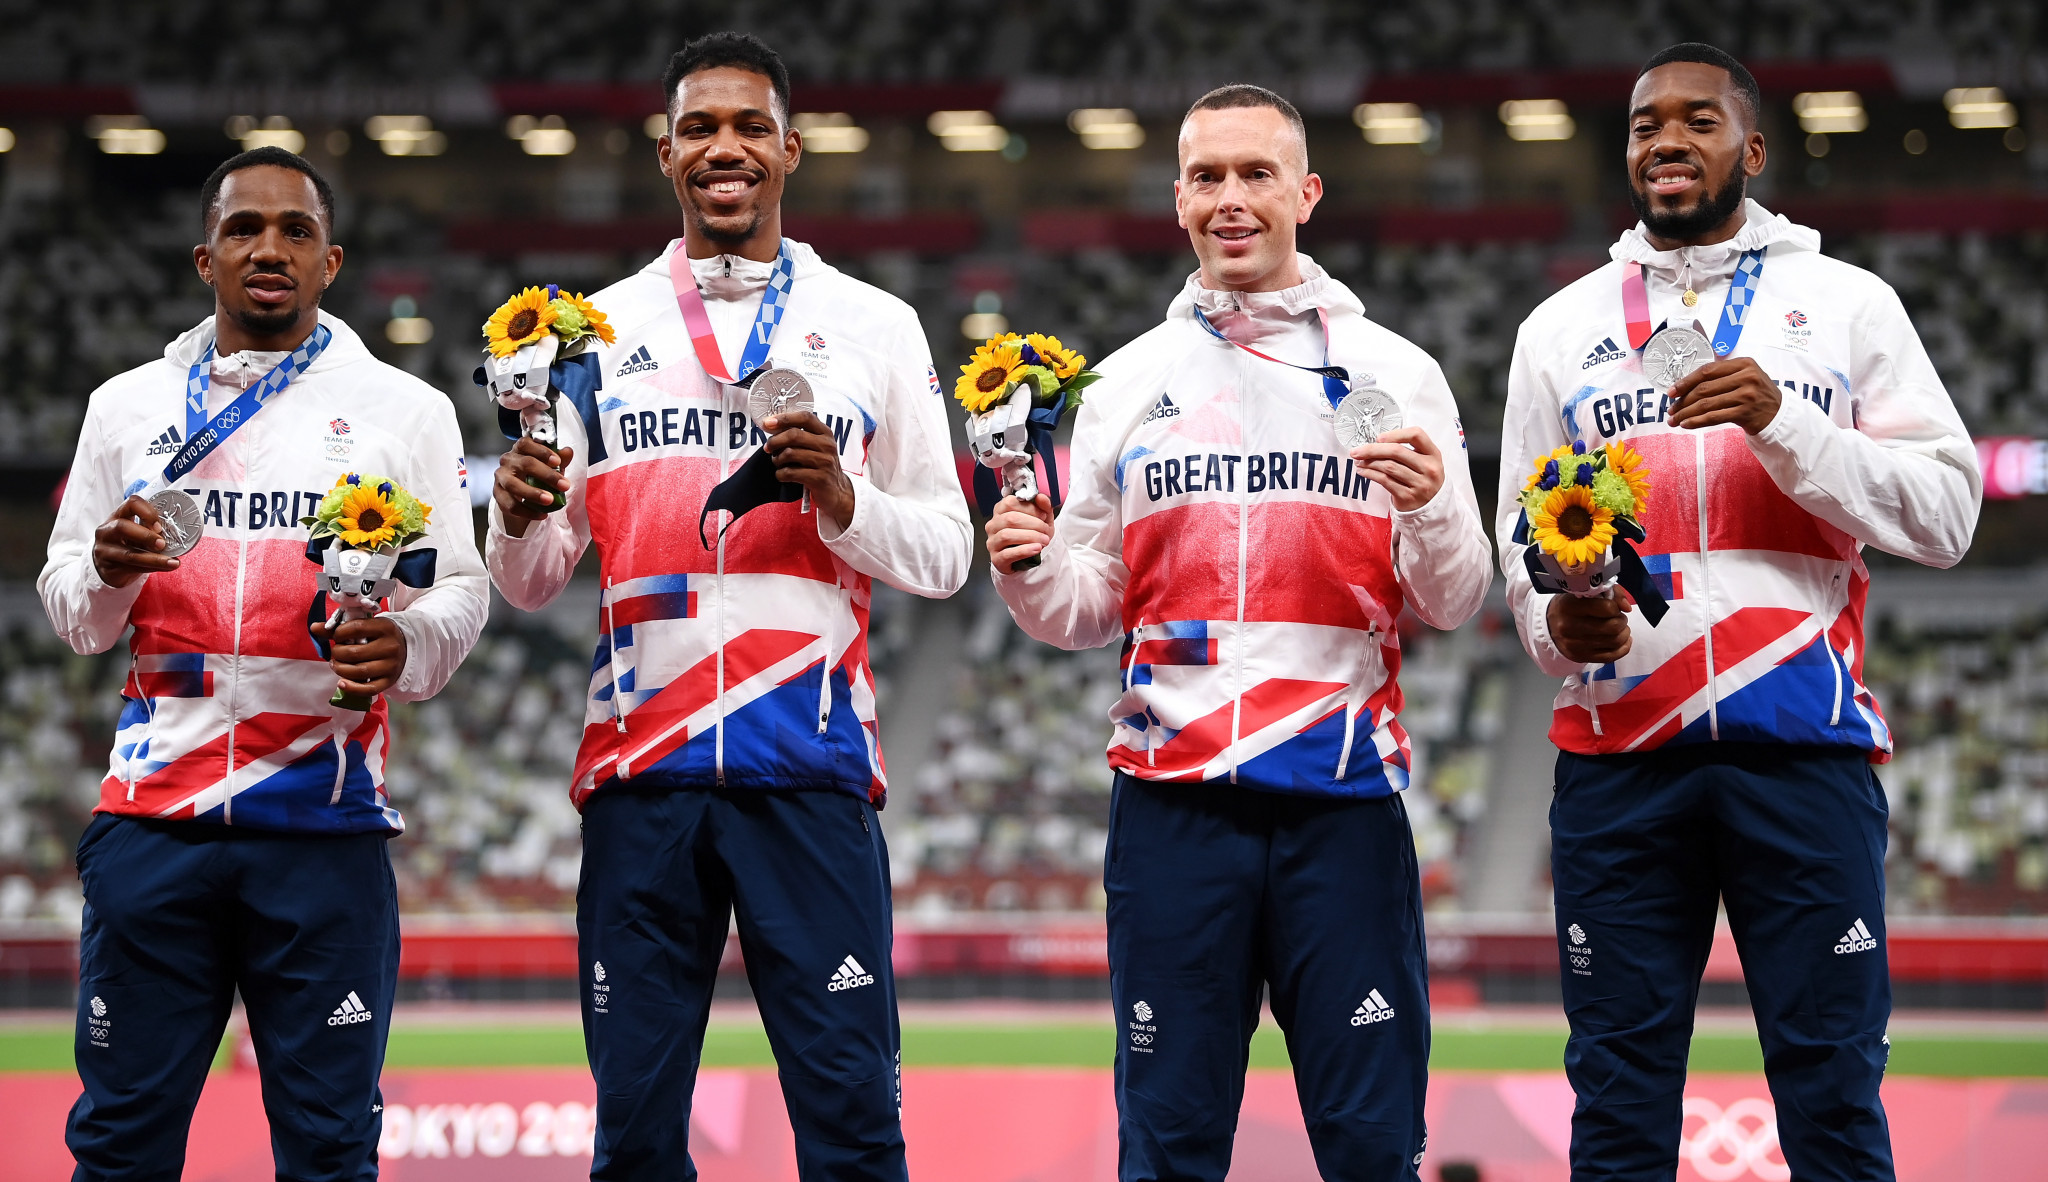 If CJ Ujah, left, is proven guilty the whole team will be stripped of their medals ©Getty Images